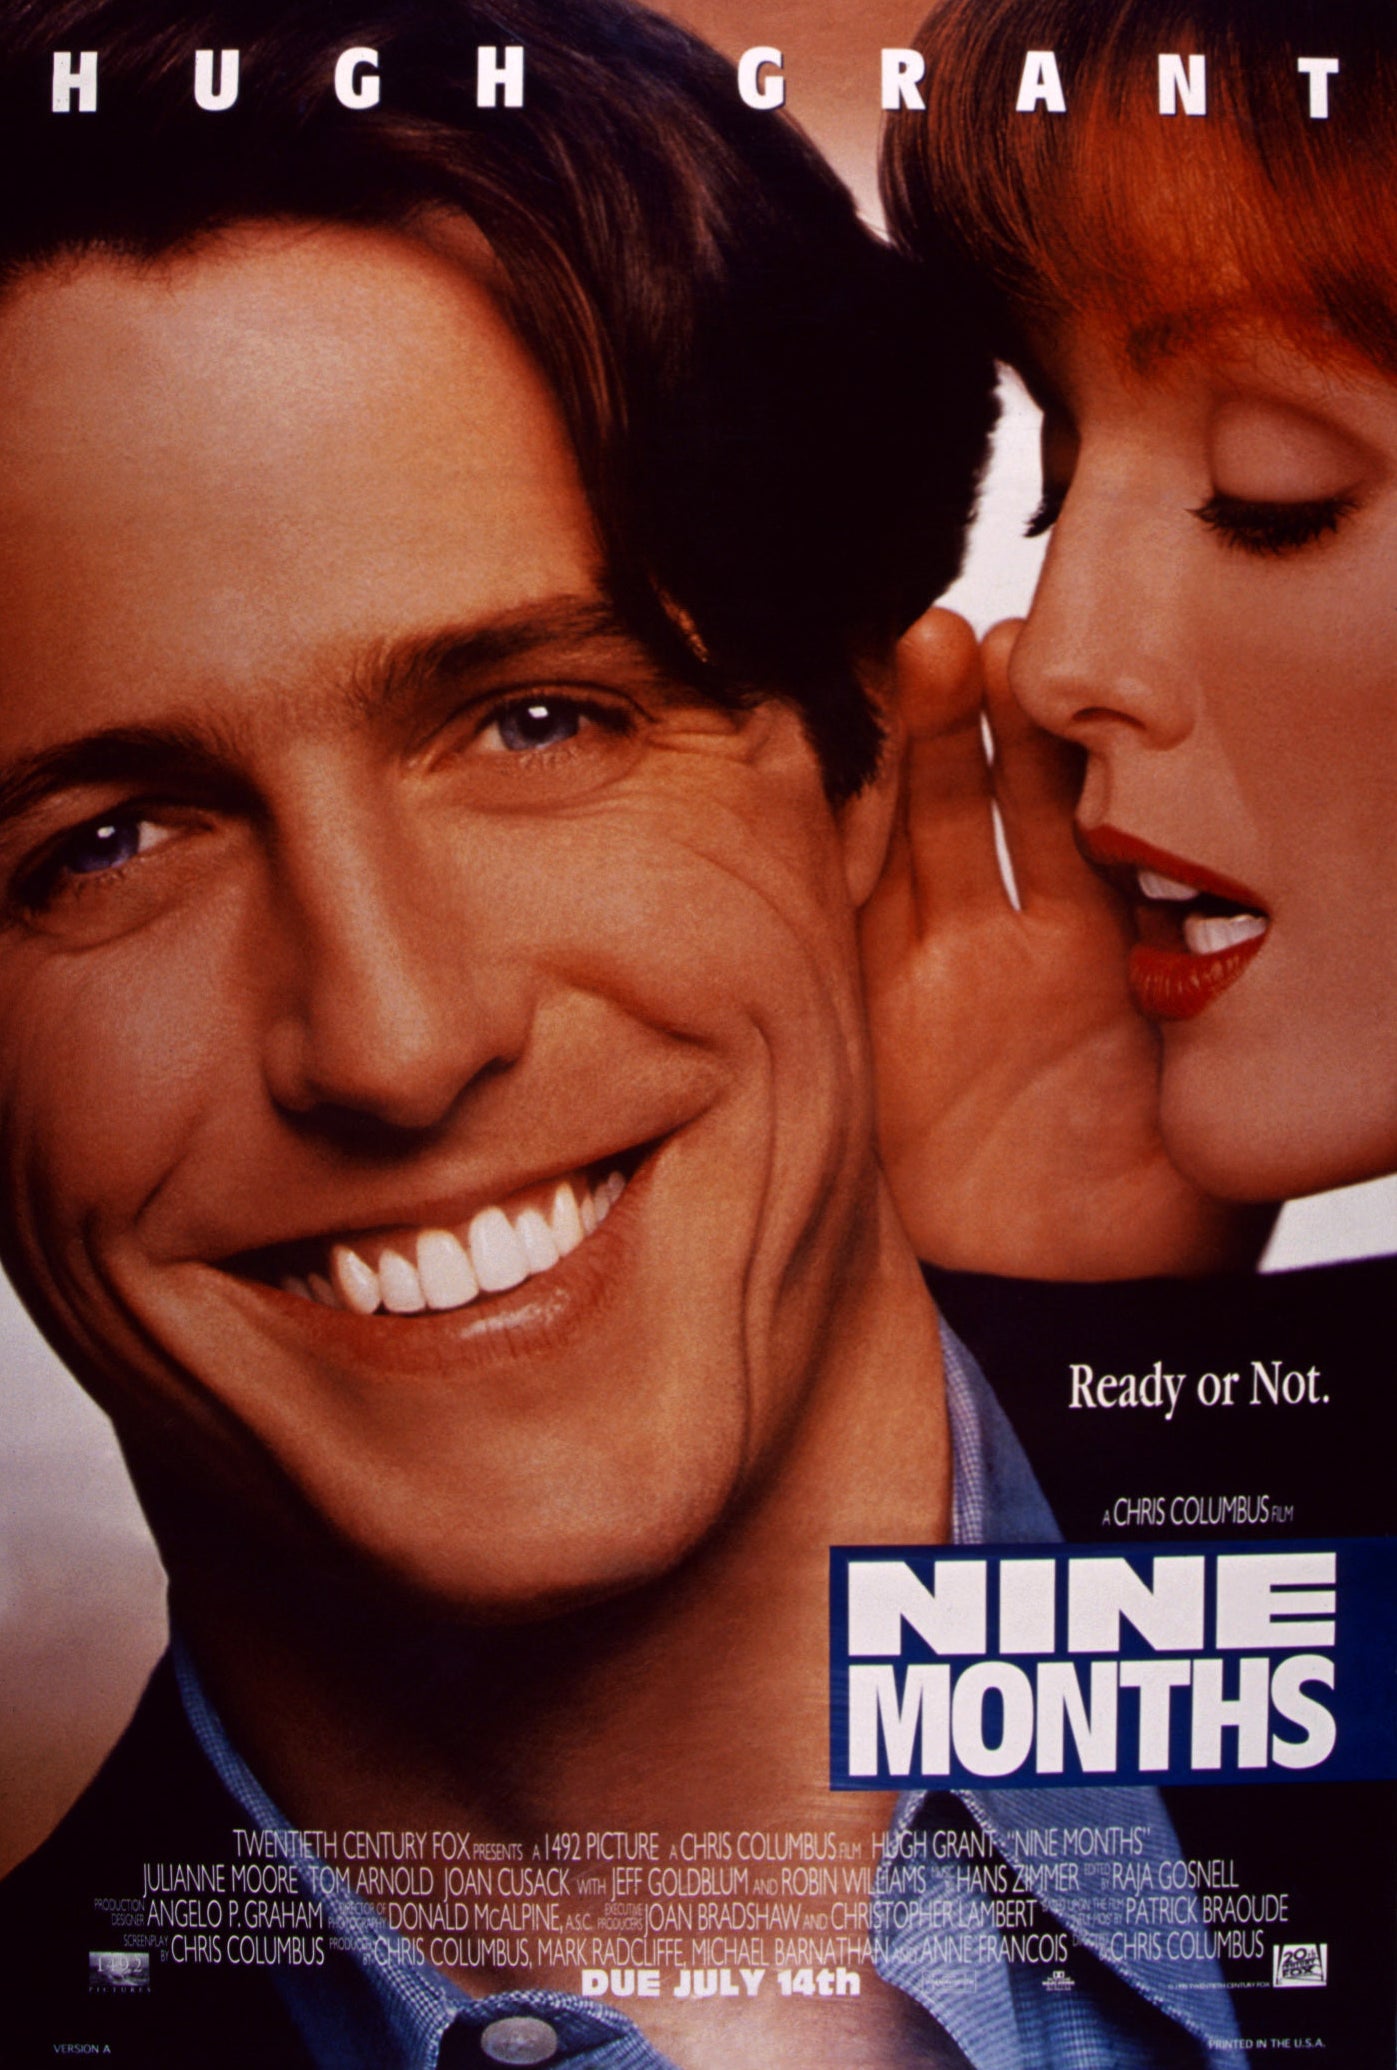 Hugh smiling in the movie poster for Nine Months, with his name at the top